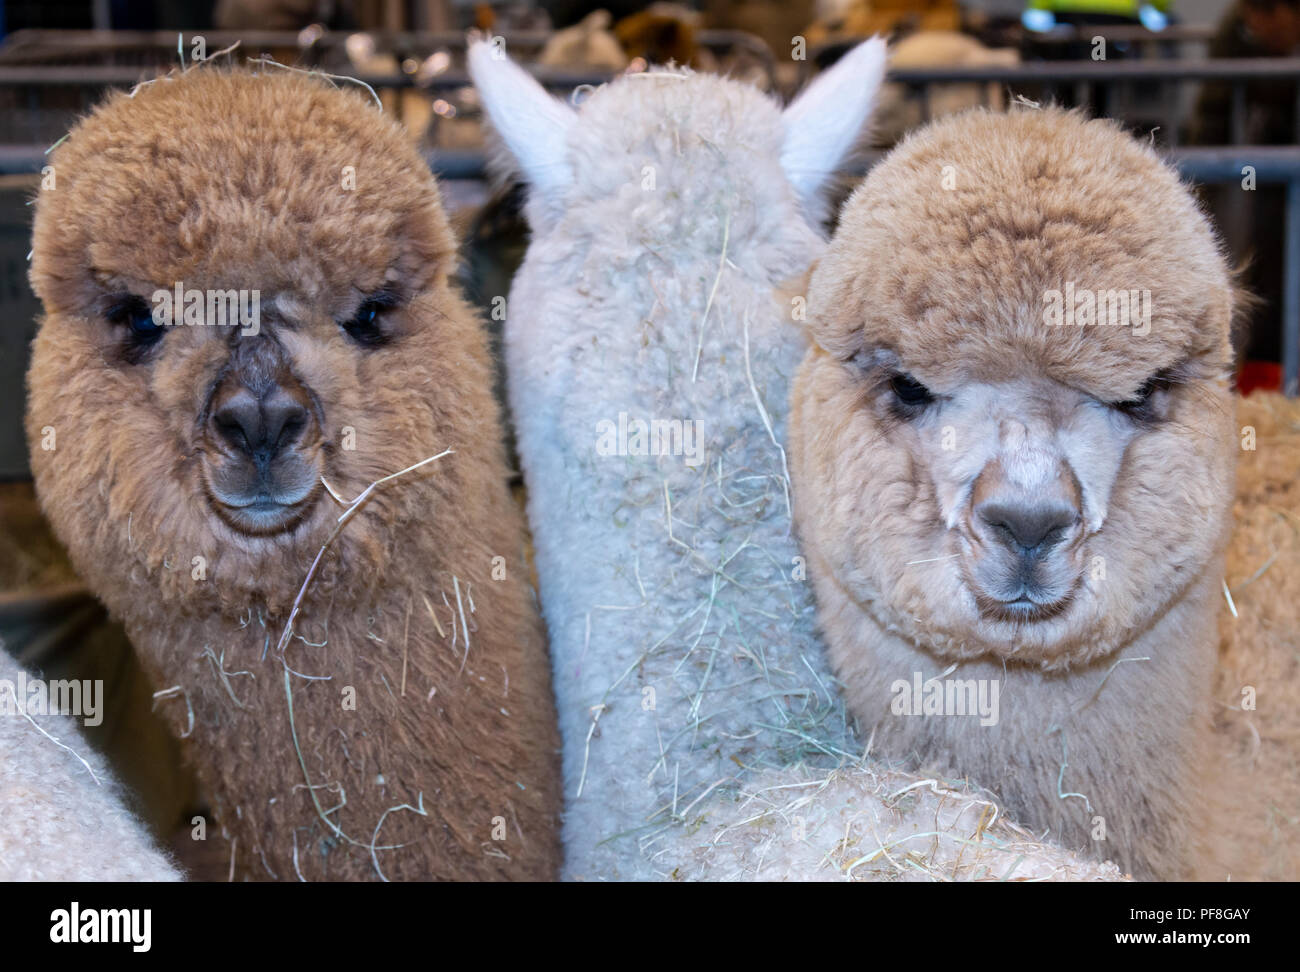 Three Young Alpacas in a judging ring,  Two are facing the camera squashed together Stock Photo